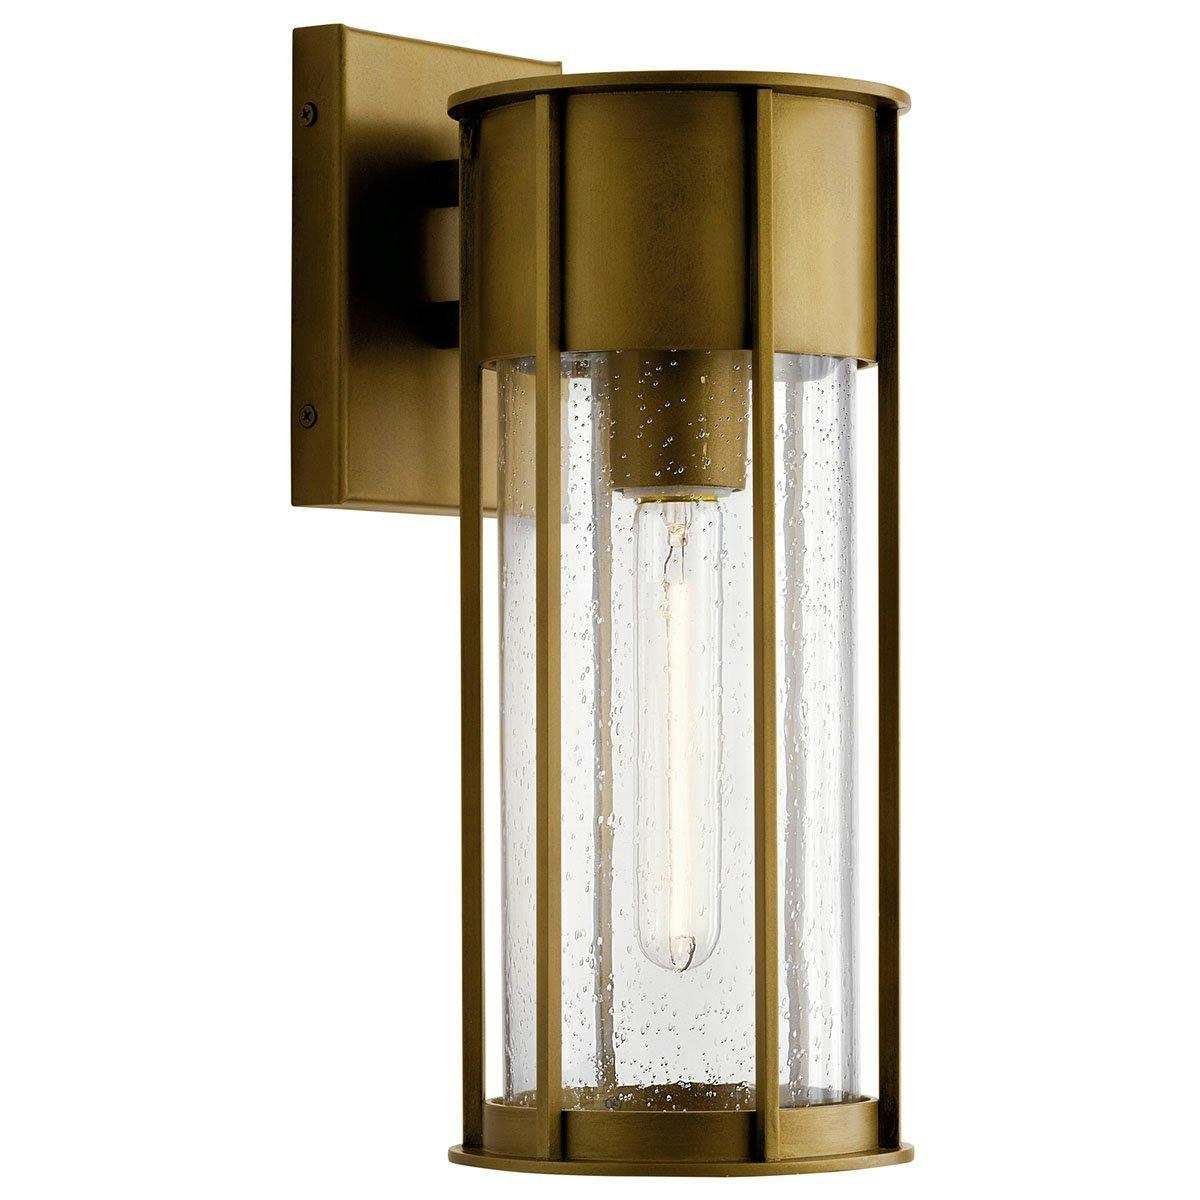 Camillo 15" 1 Light Wall Light Brass on a white background